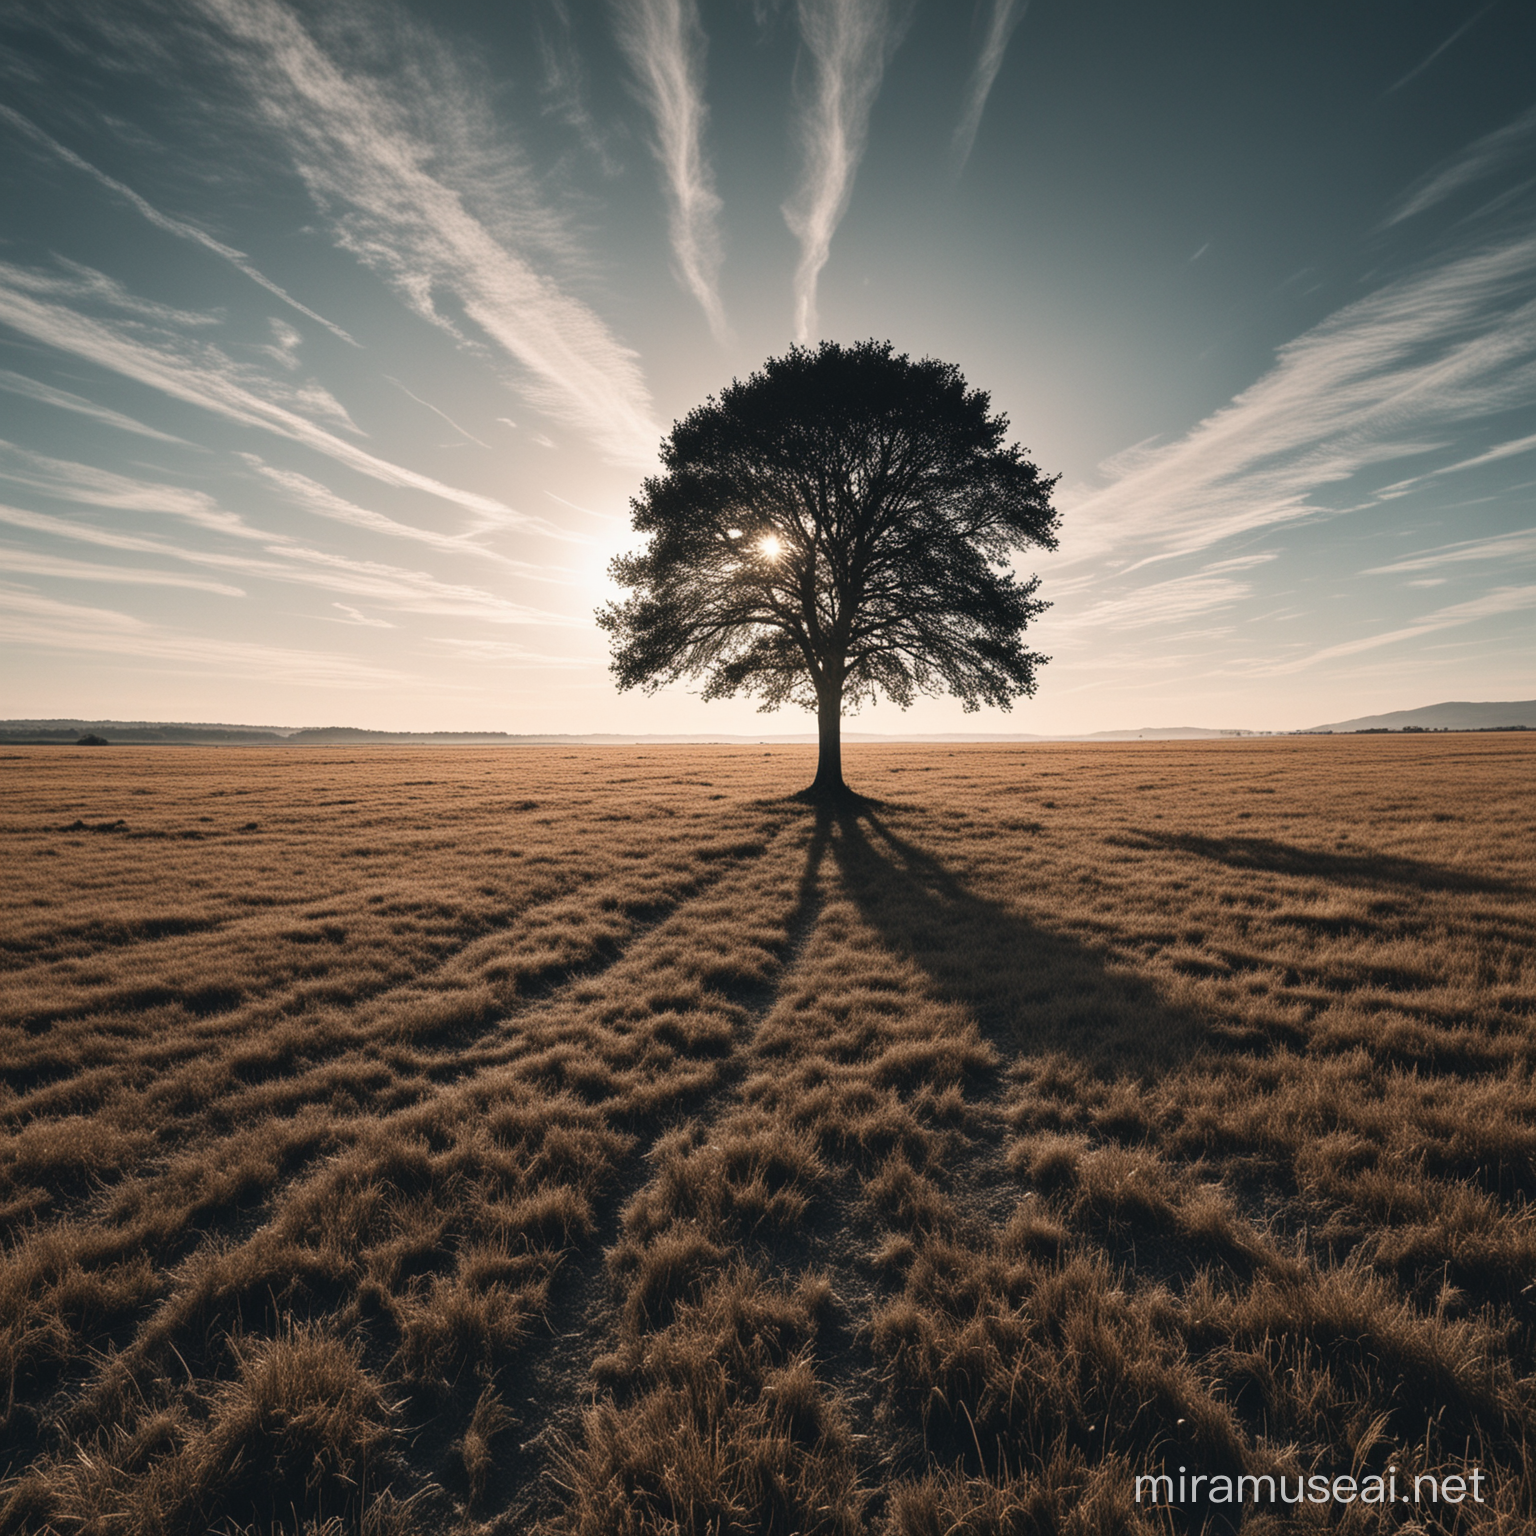 Surreal UpsideDown World with Solitary Tree and Empty Grassland